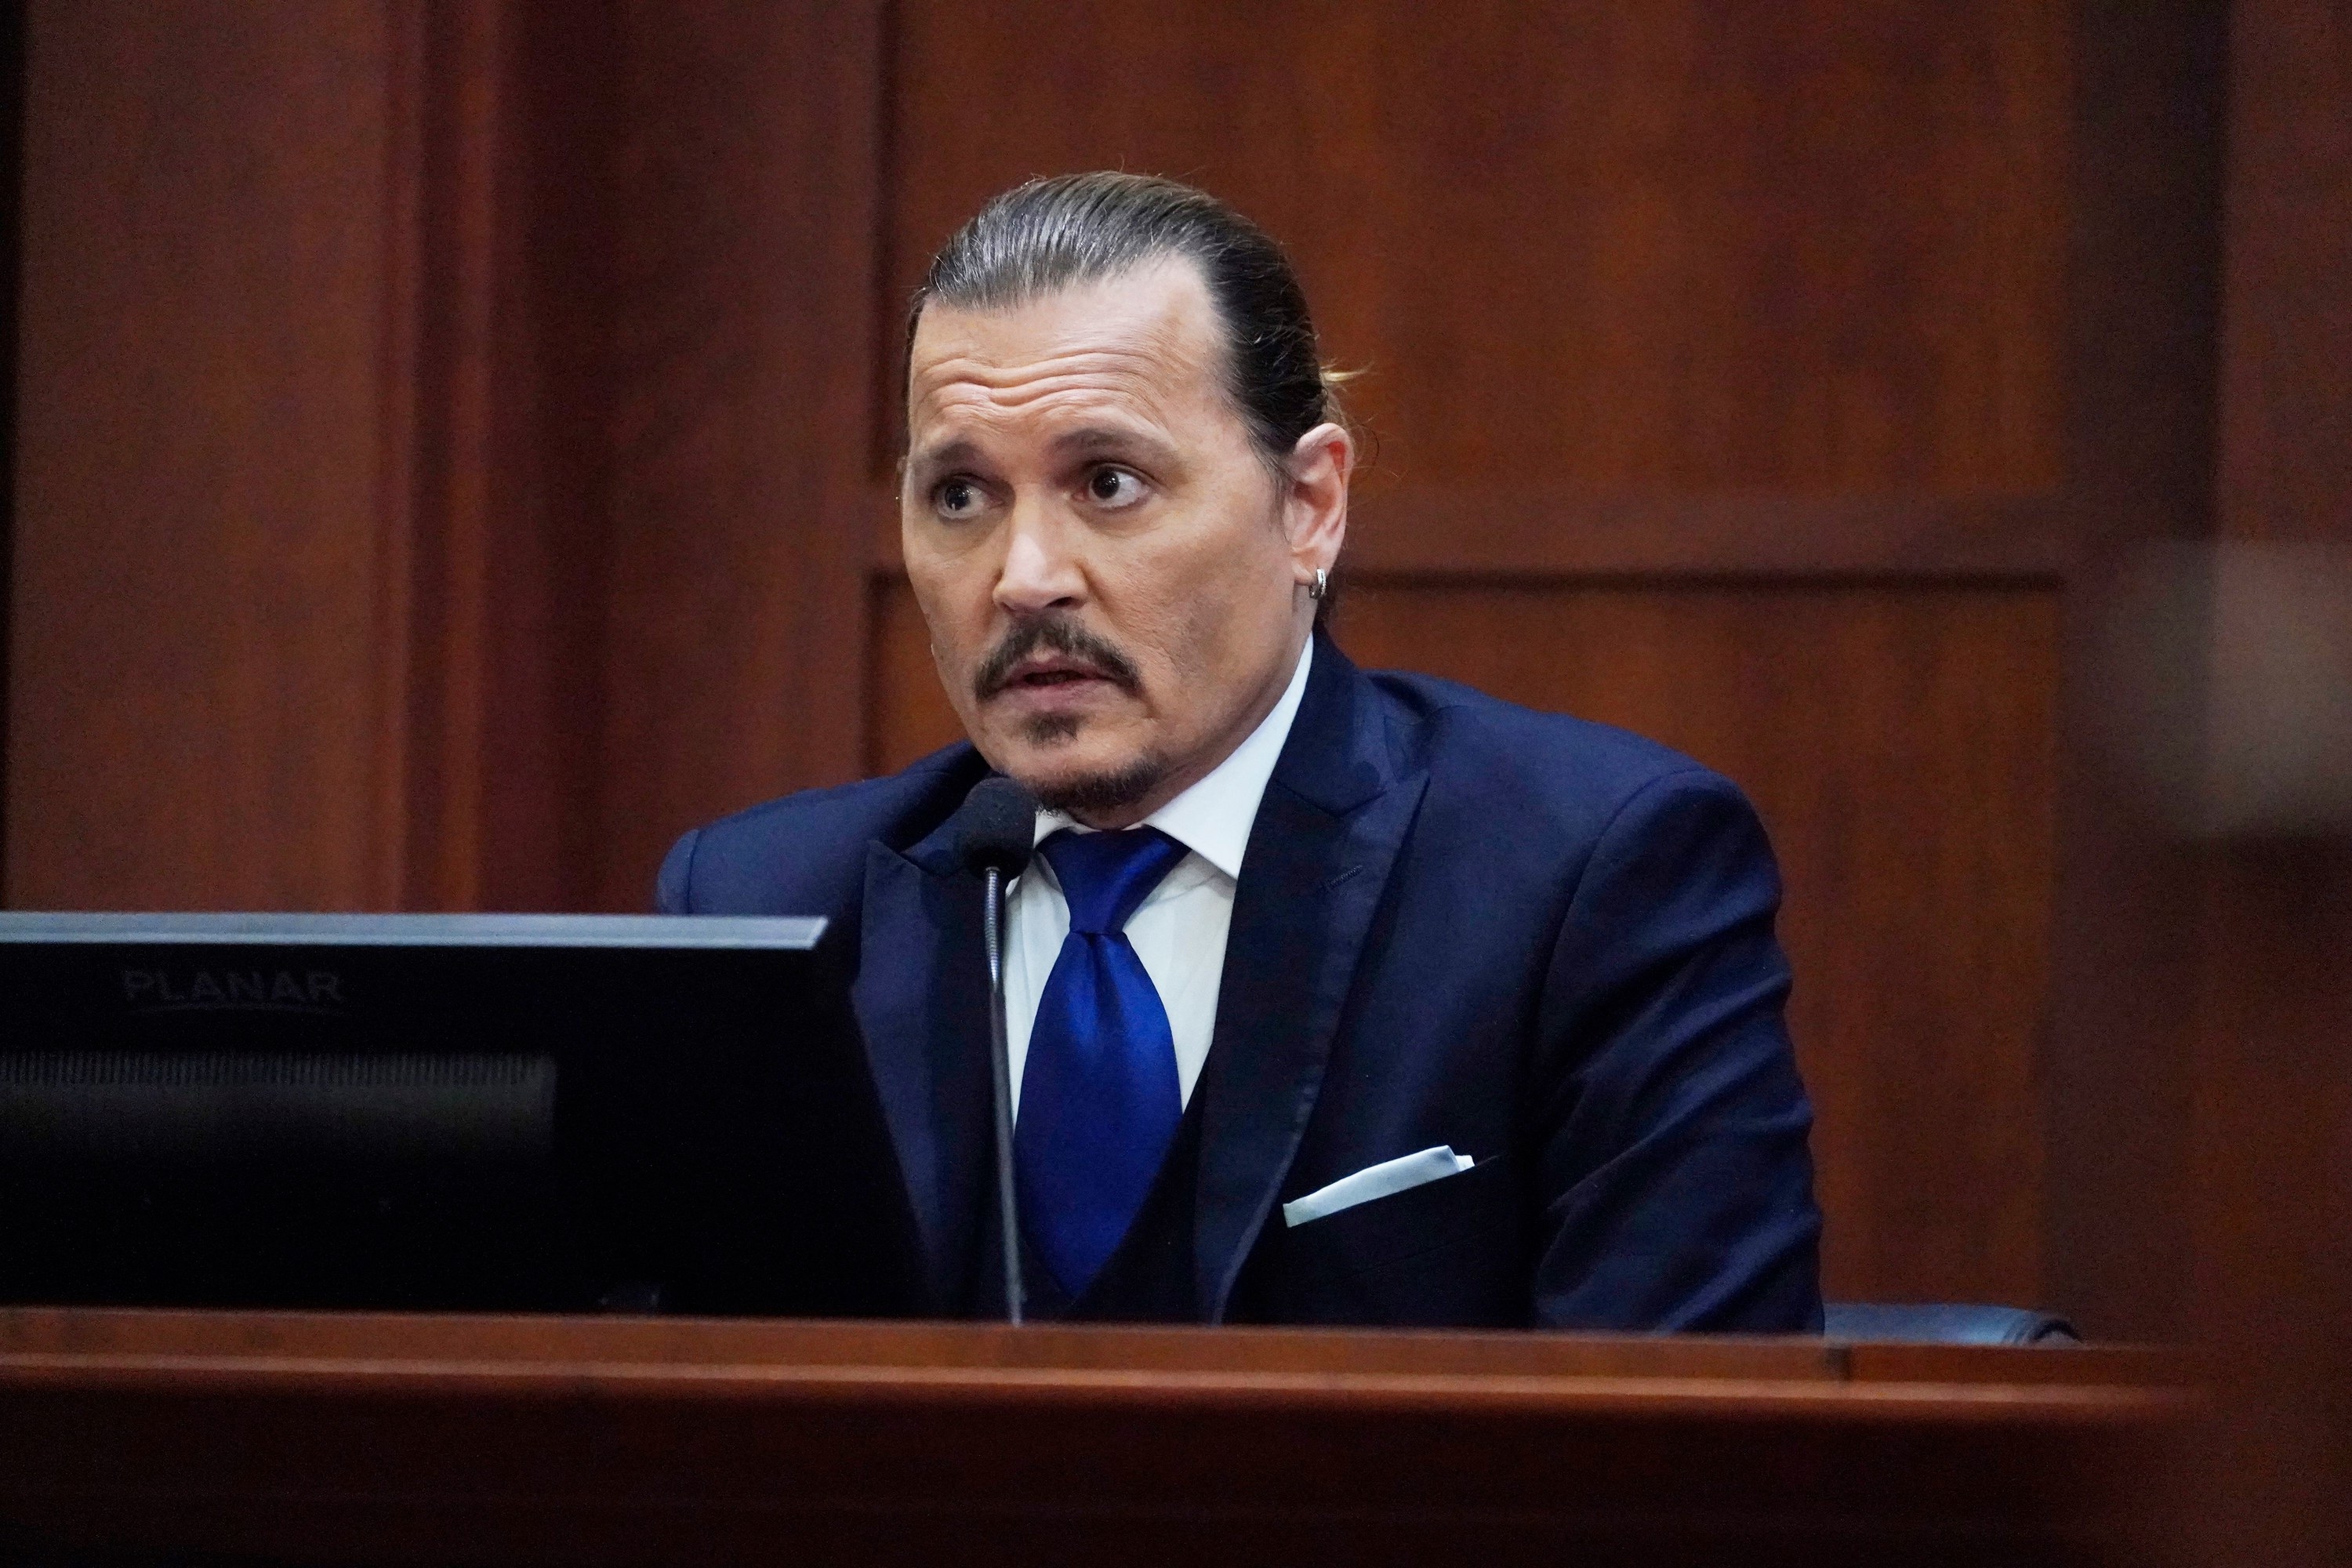 Johnny Depp testifies in the courtroom at the Fairfax County Circuit Courthouse in Fairfax, Virginia, April 25, 2022